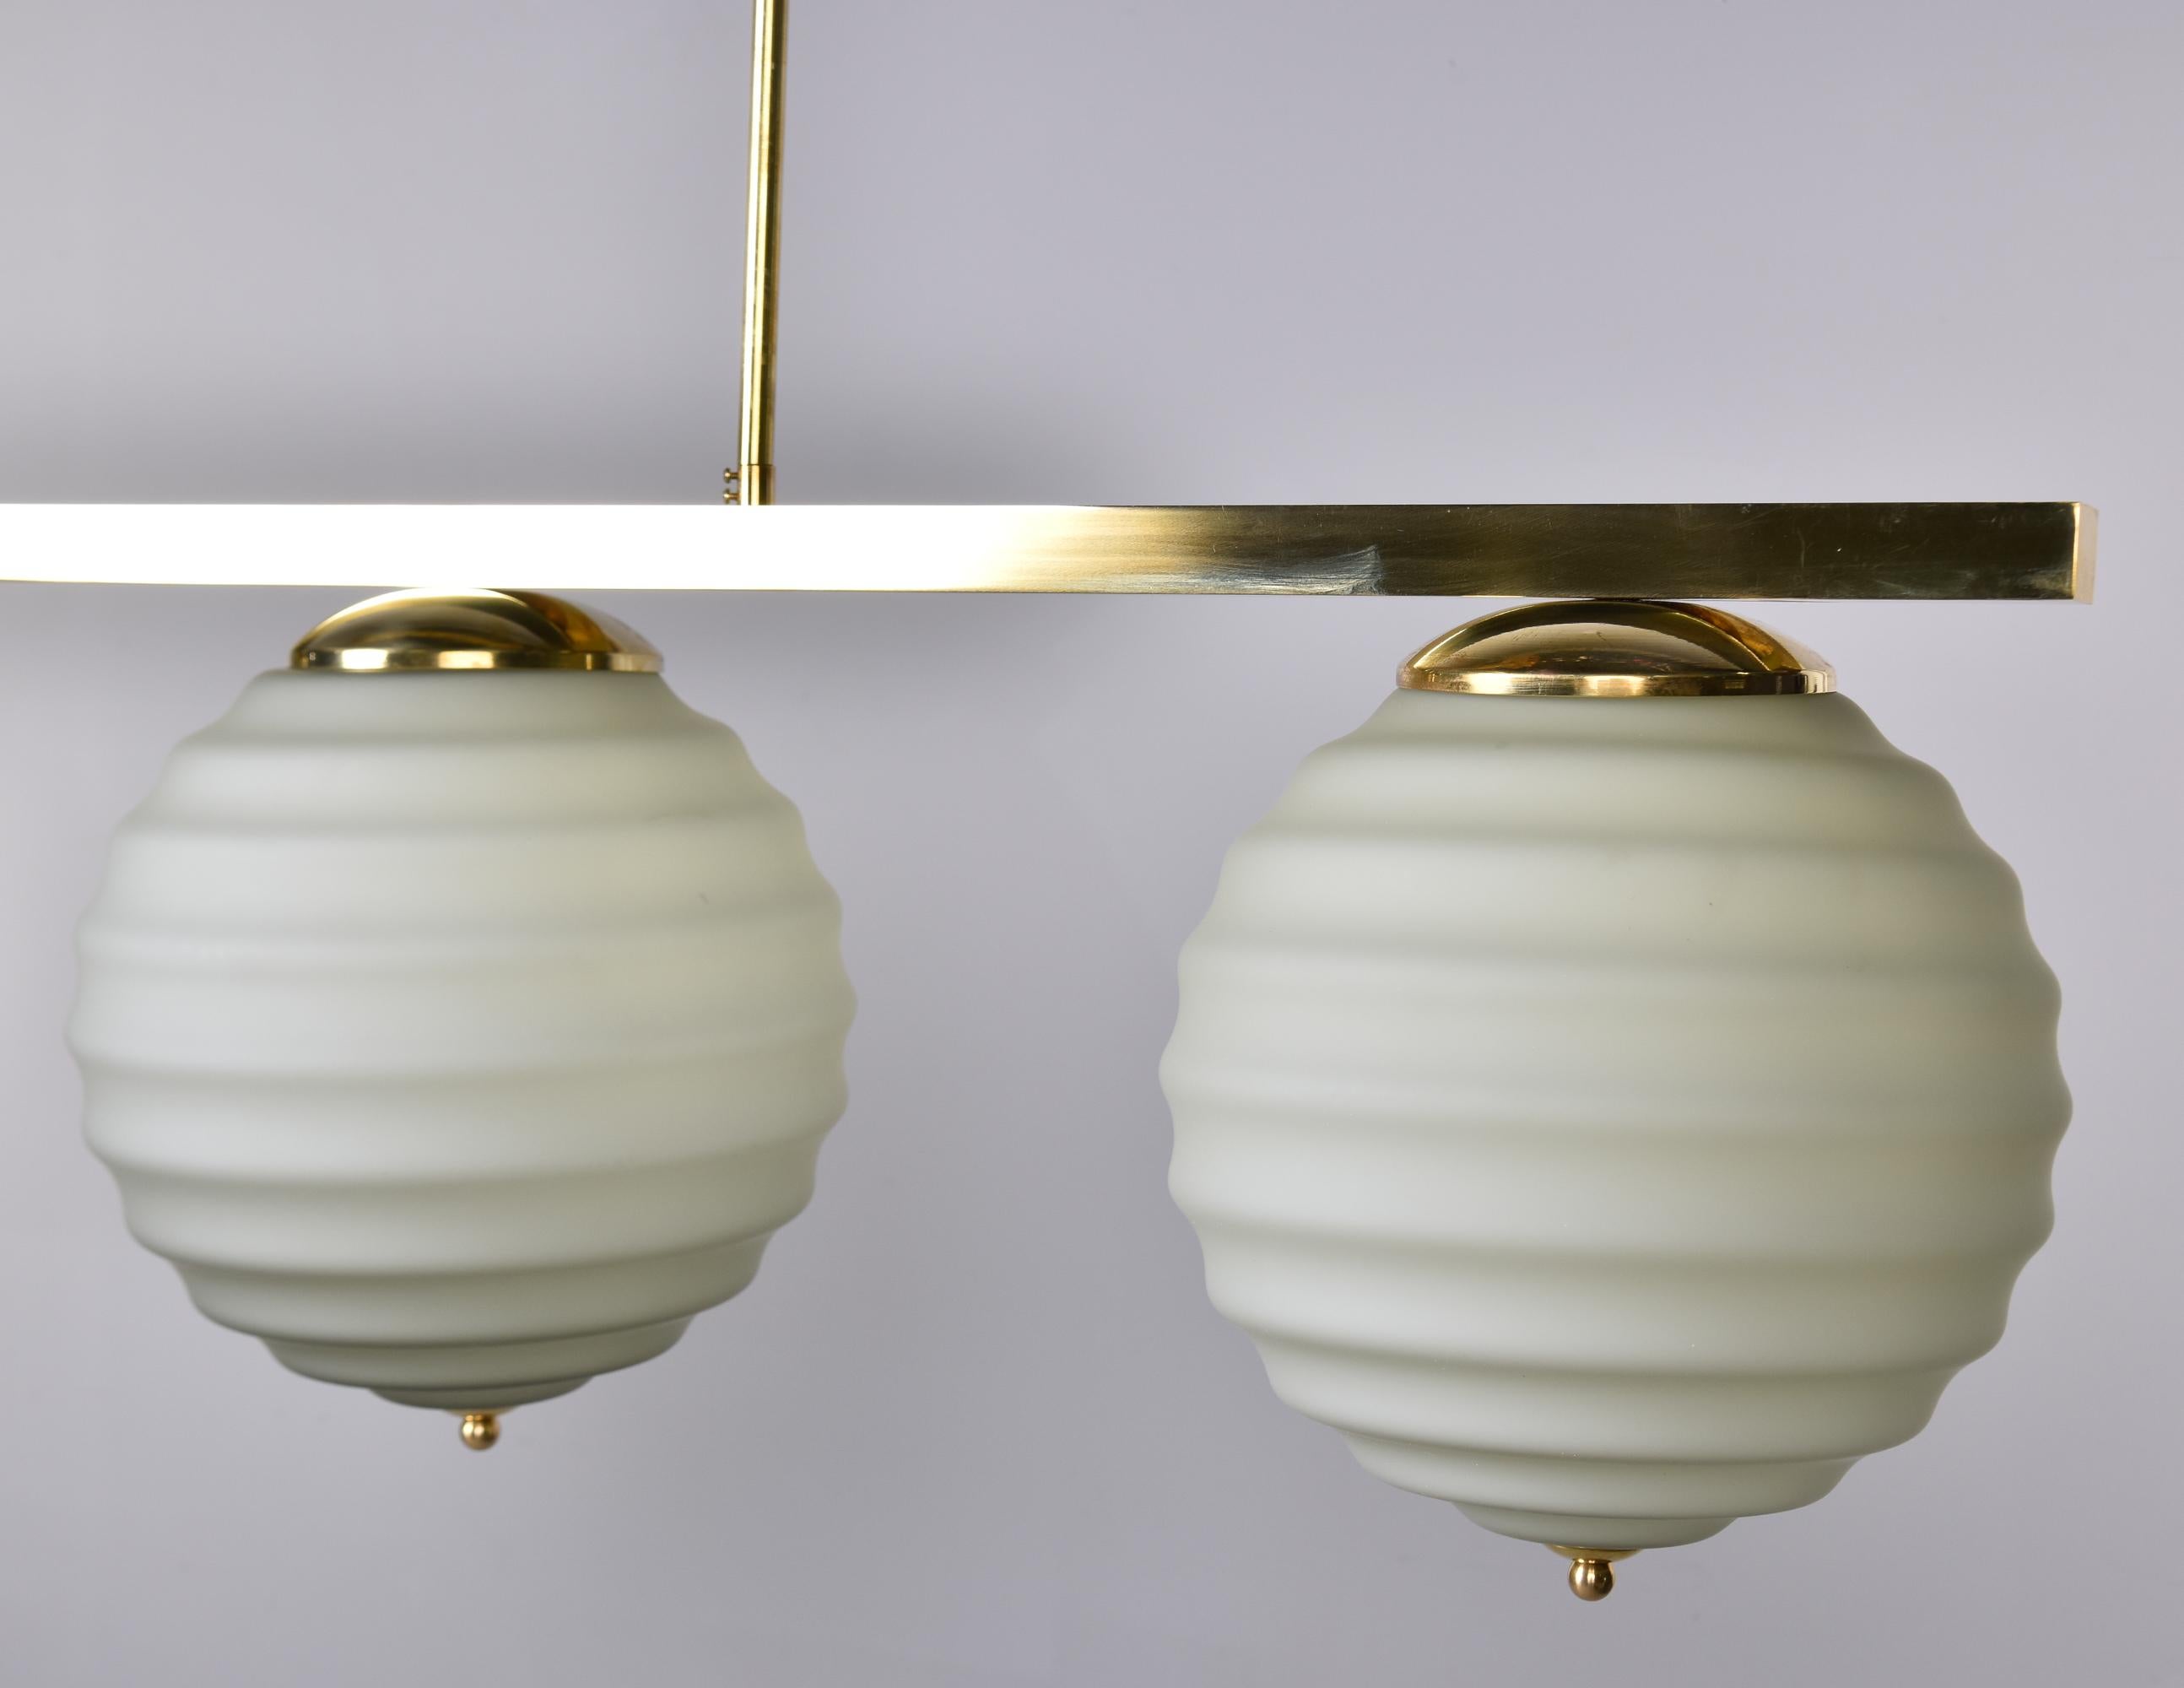 New Italian Fixture with Four Pale Taupe Globes on Horizontal Brass Bar For Sale 7